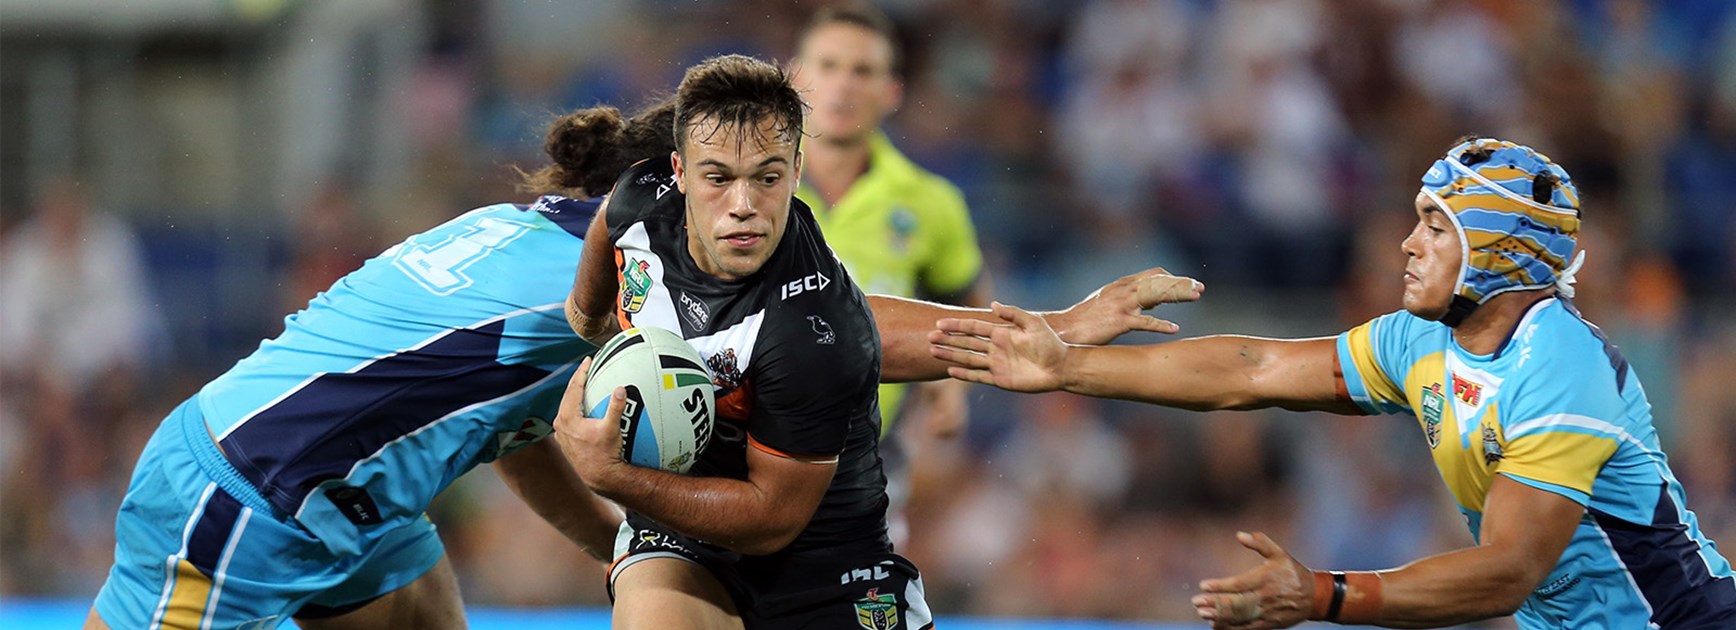 Wests Tigers halfback Luke Brooks in action against the Titans on Saturday night.